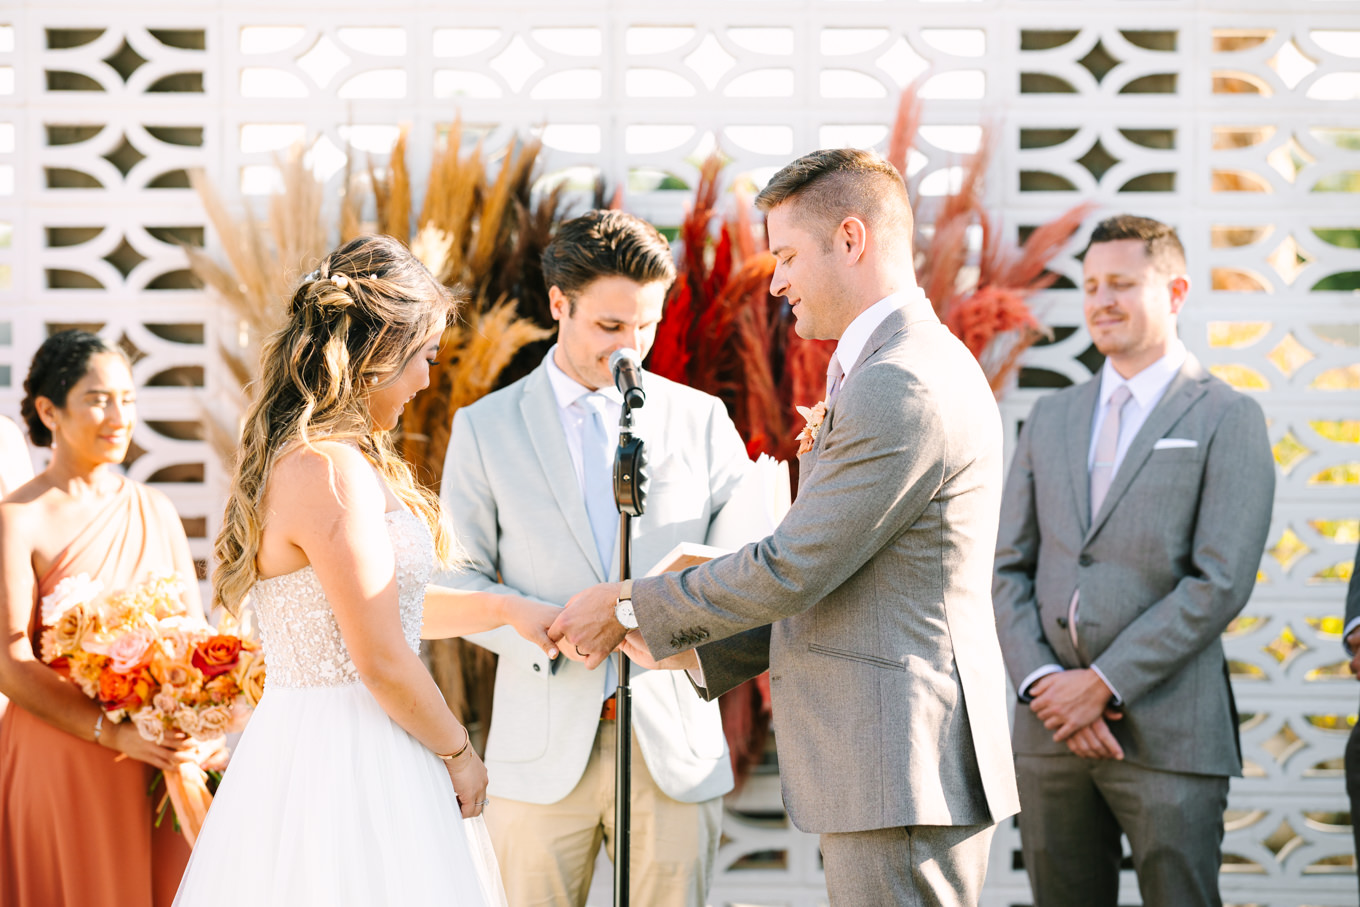 Exchanging rings at wedding ceremony | Pink and orange Lautner Compound wedding | Colorful Palm Springs wedding photography | #palmspringsphotographer #palmspringswedding #lautnercompound #southerncaliforniawedding  Source: Mary Costa Photography | Los Angeles